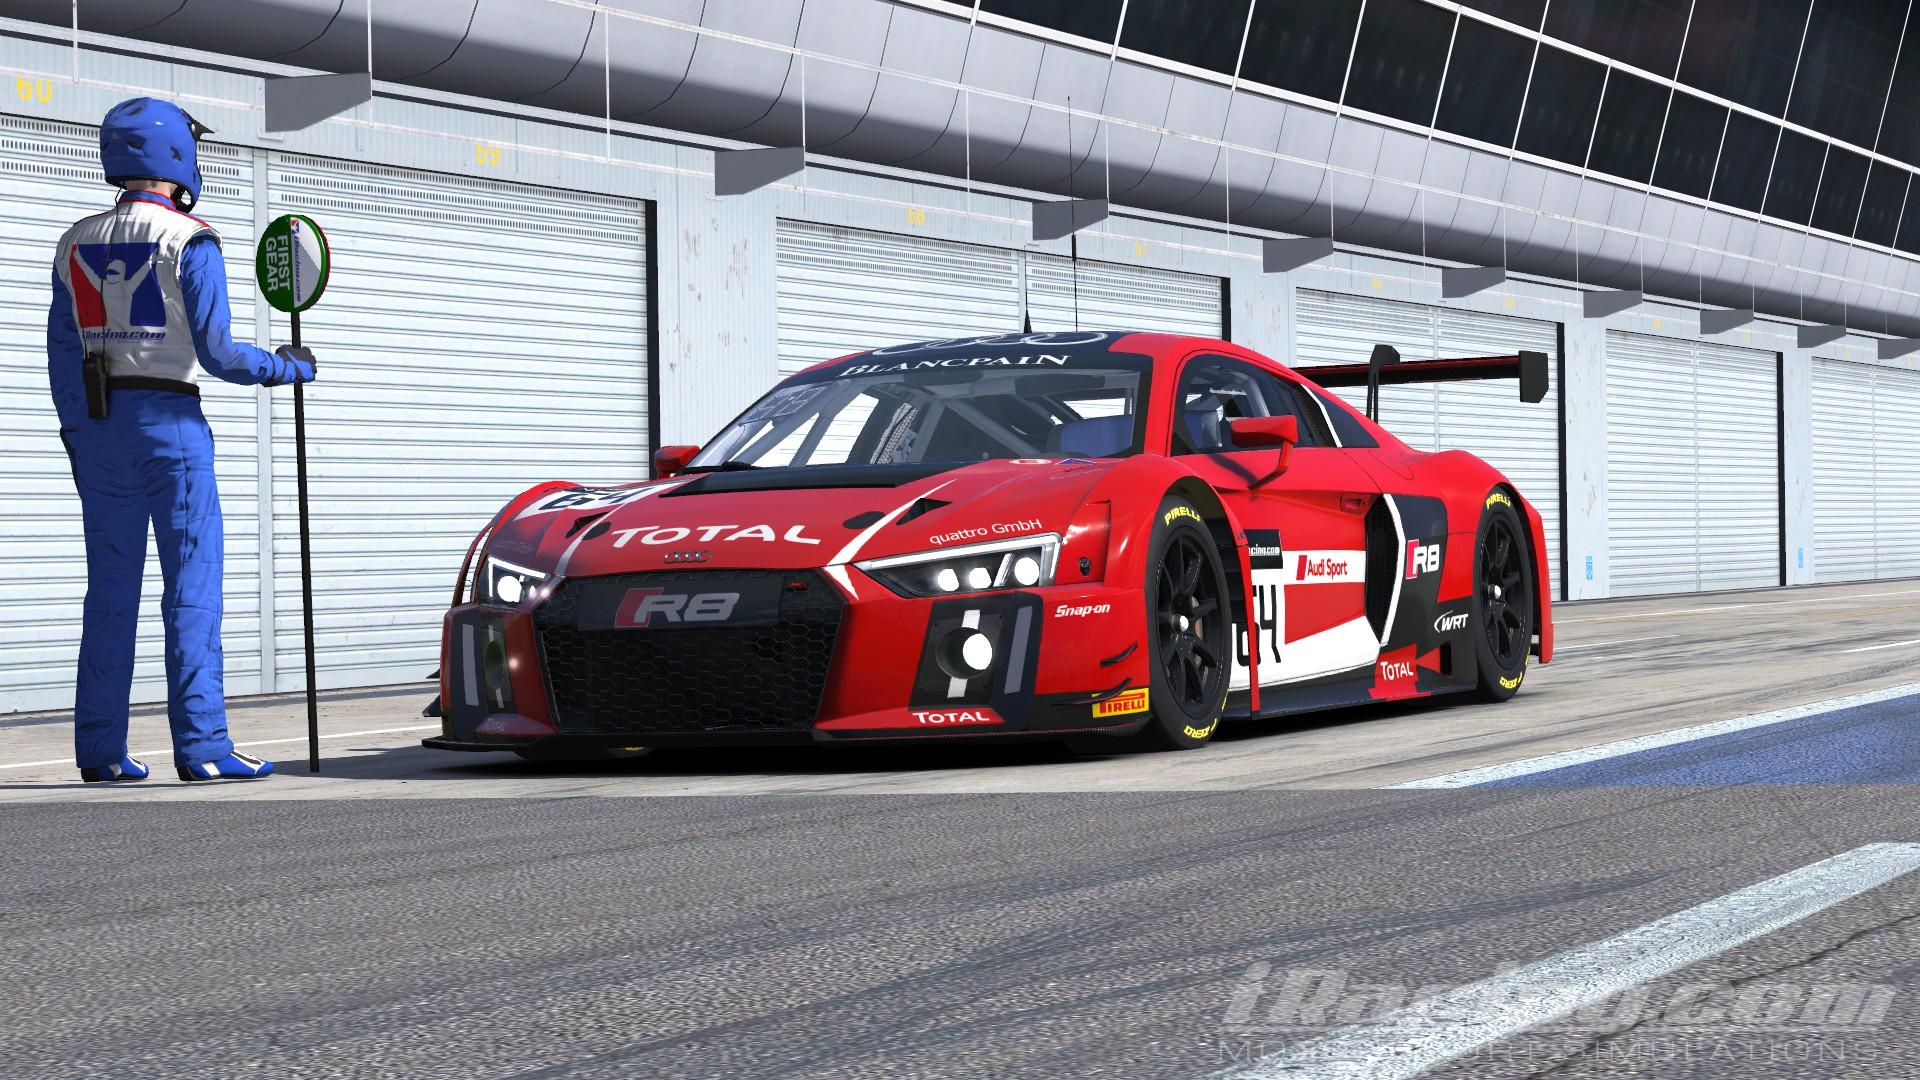 Preview of 24 Hours of Spa 2015 Audi R8 LMS by Coen Klopman